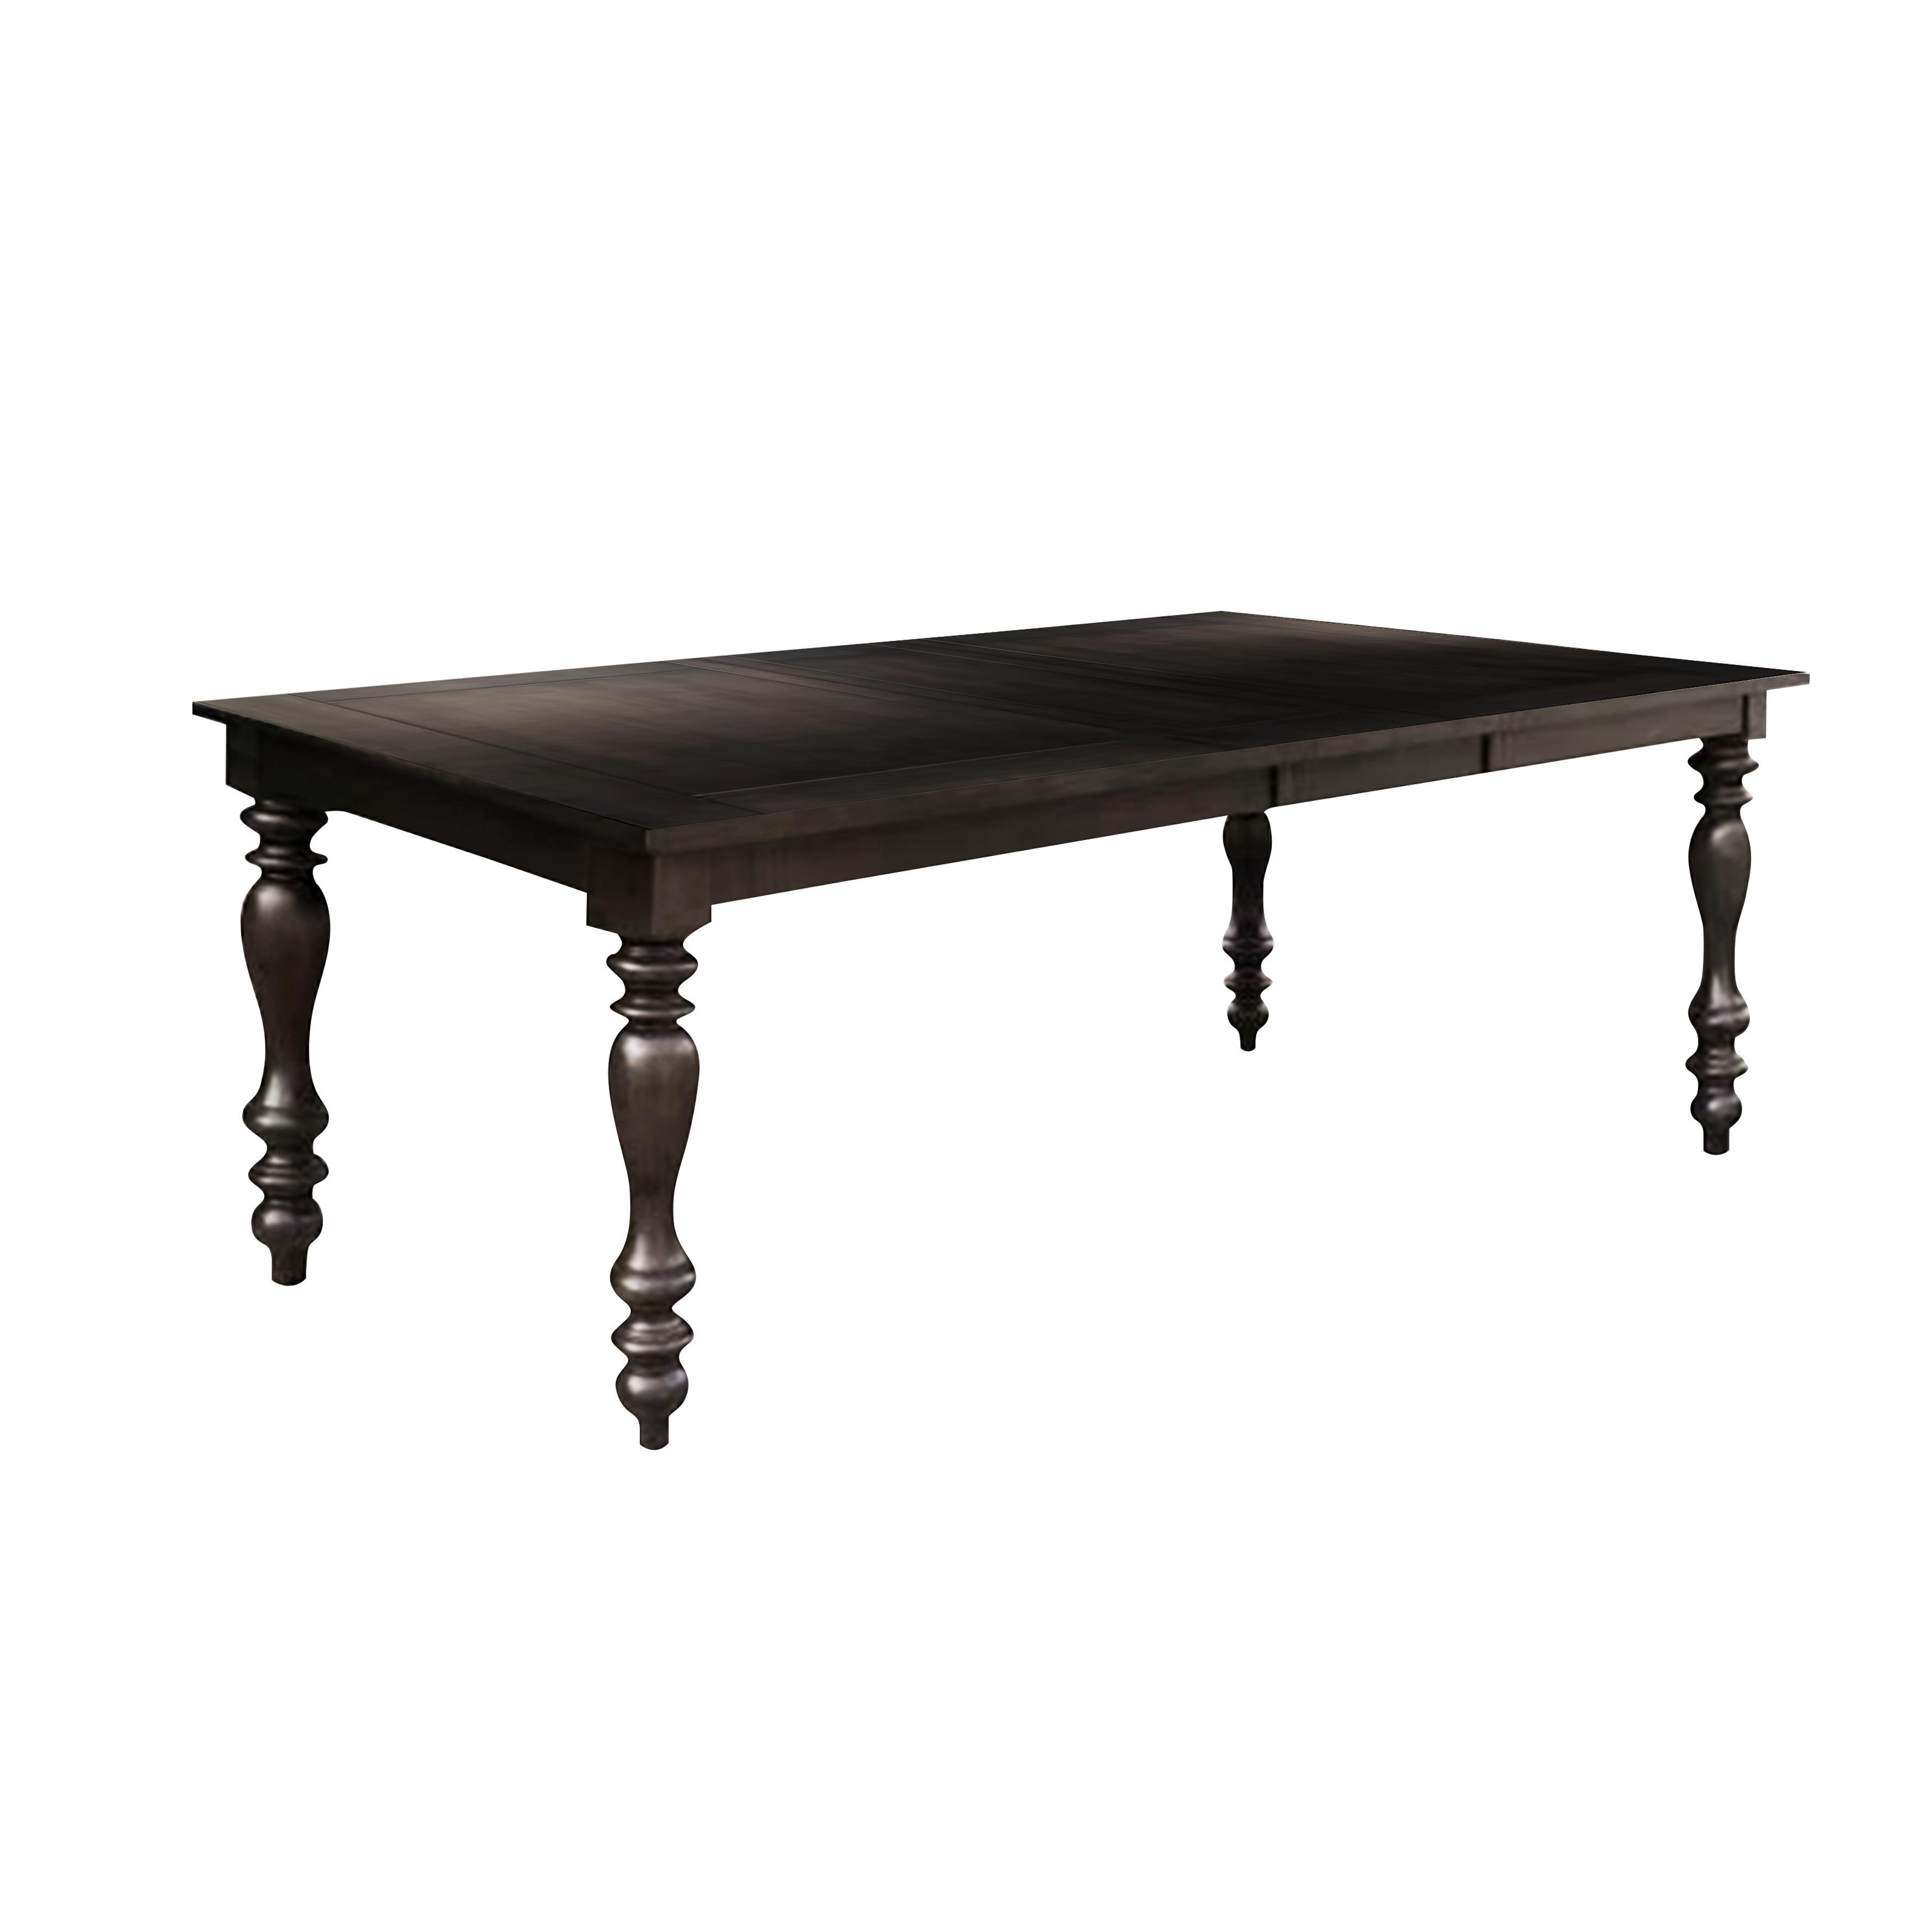 Homelegance 1718GY-90 Begonia Dining Table